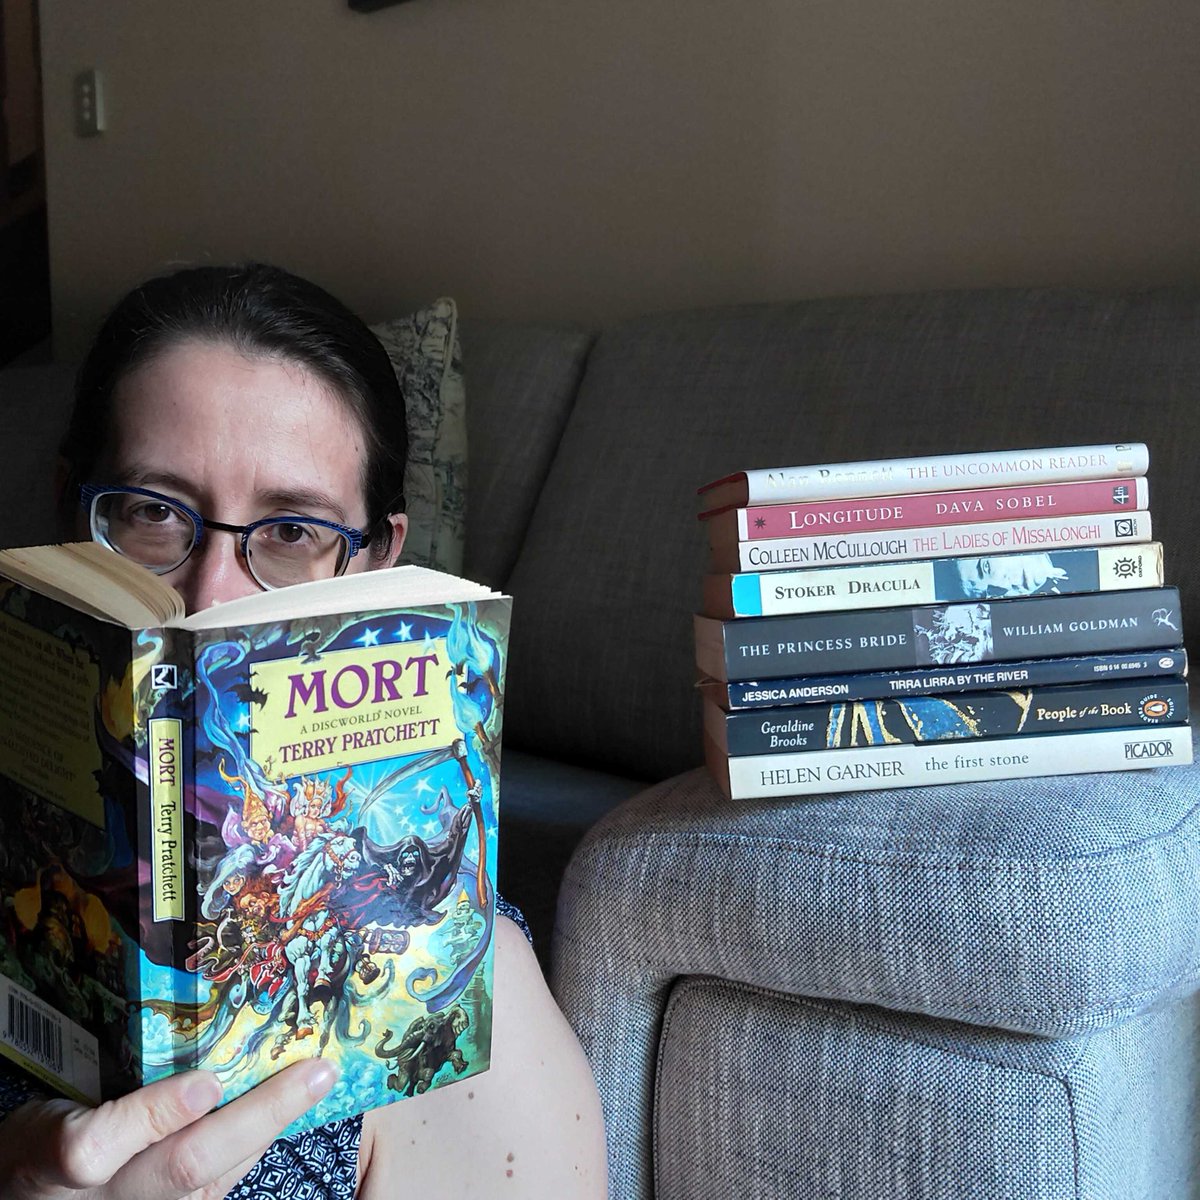 Another stack of books and a pair of glasses (people are going to stereotype us!) Project manager Penny has a mix of genres in her pile: have you read any?  #WorldBookDay 7/